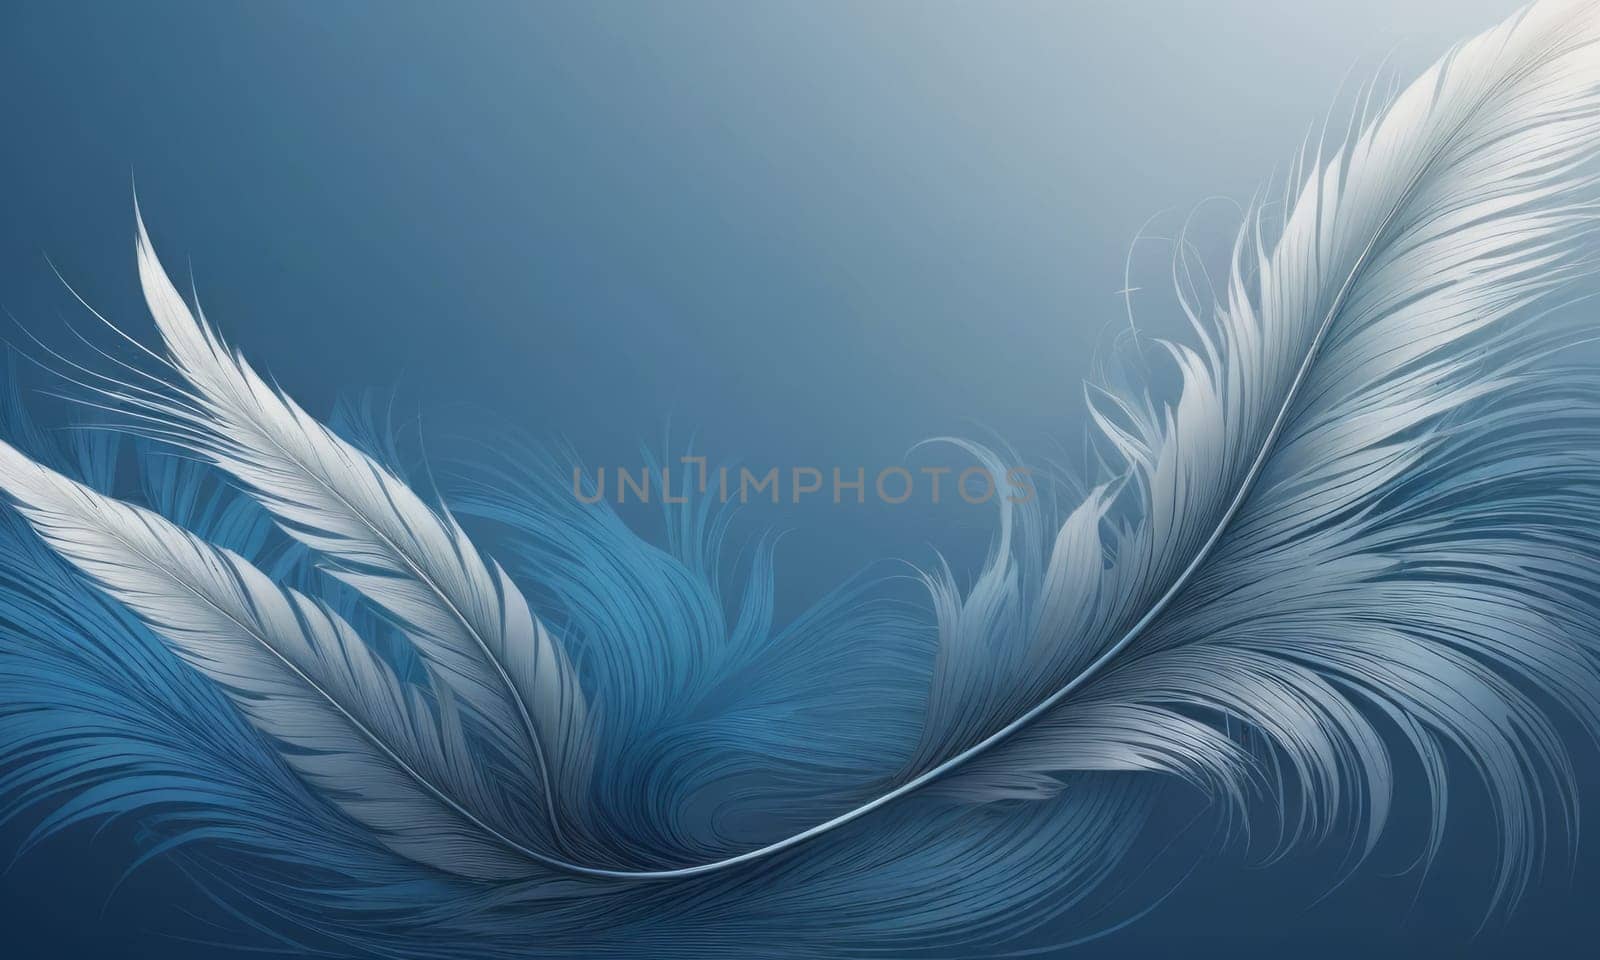 Feathered Shapes in Silver Slate blue by nkotlyar